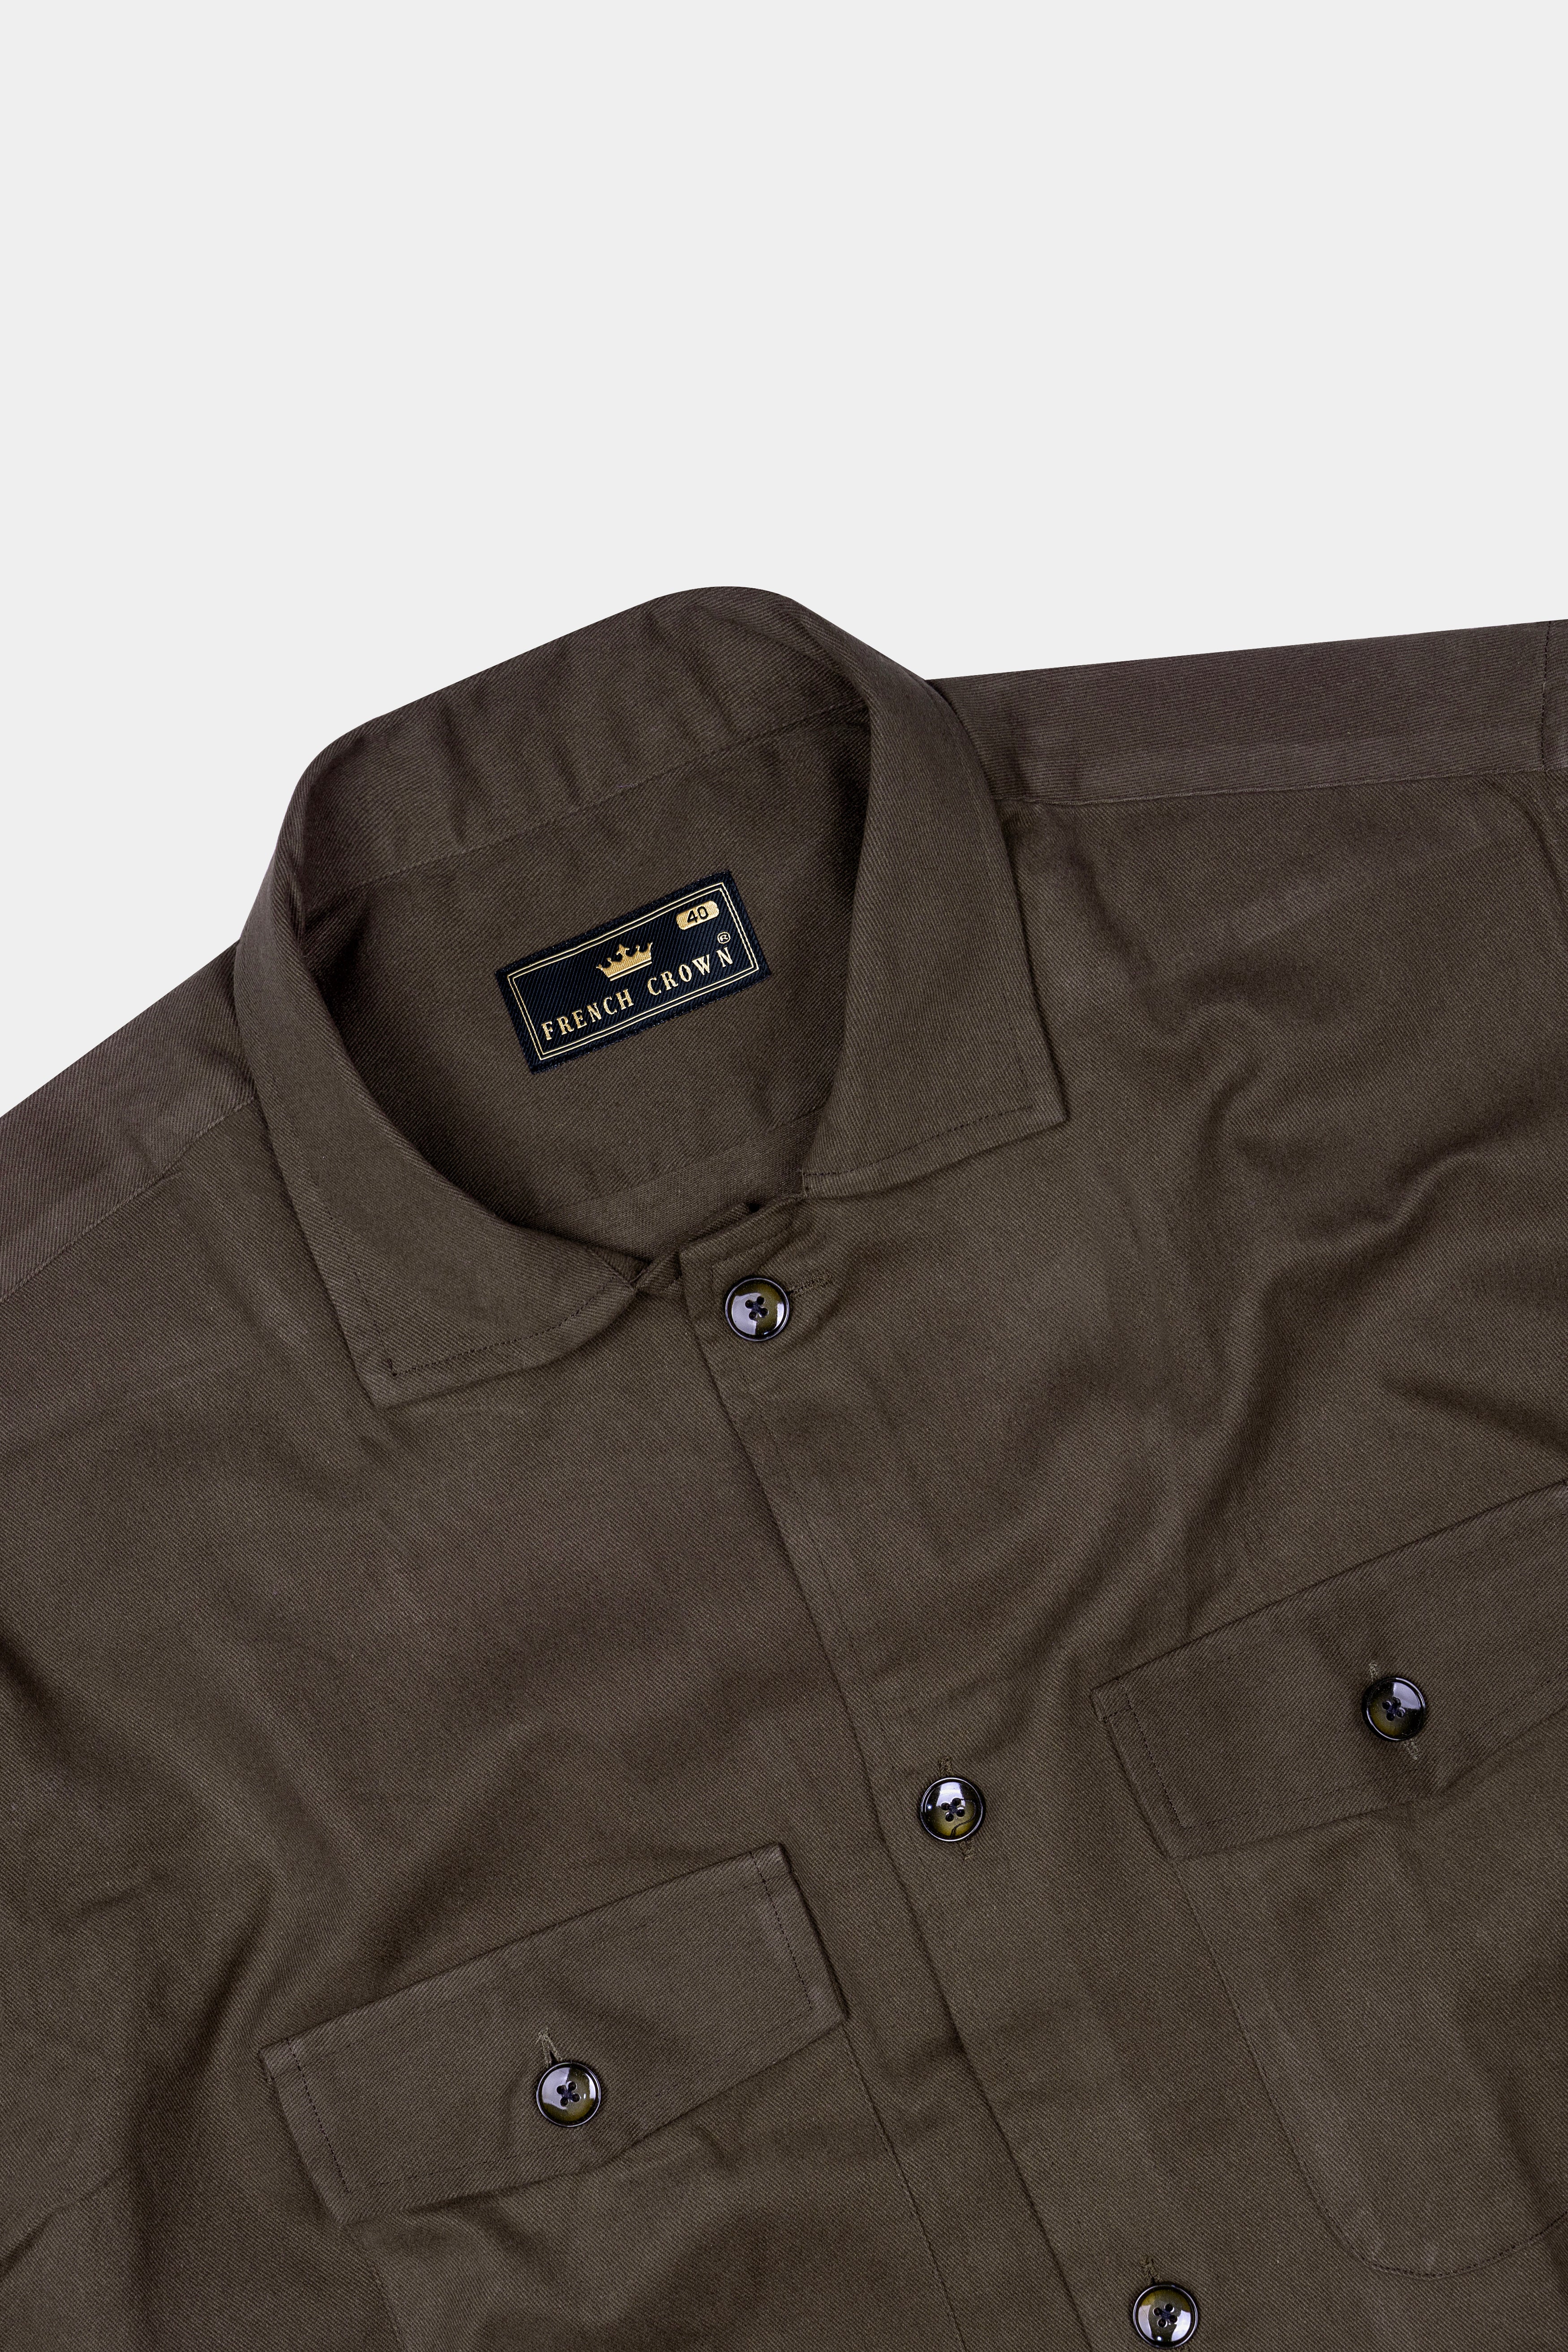 Taupe Brown Heavyweight Twill Cotton Shacket